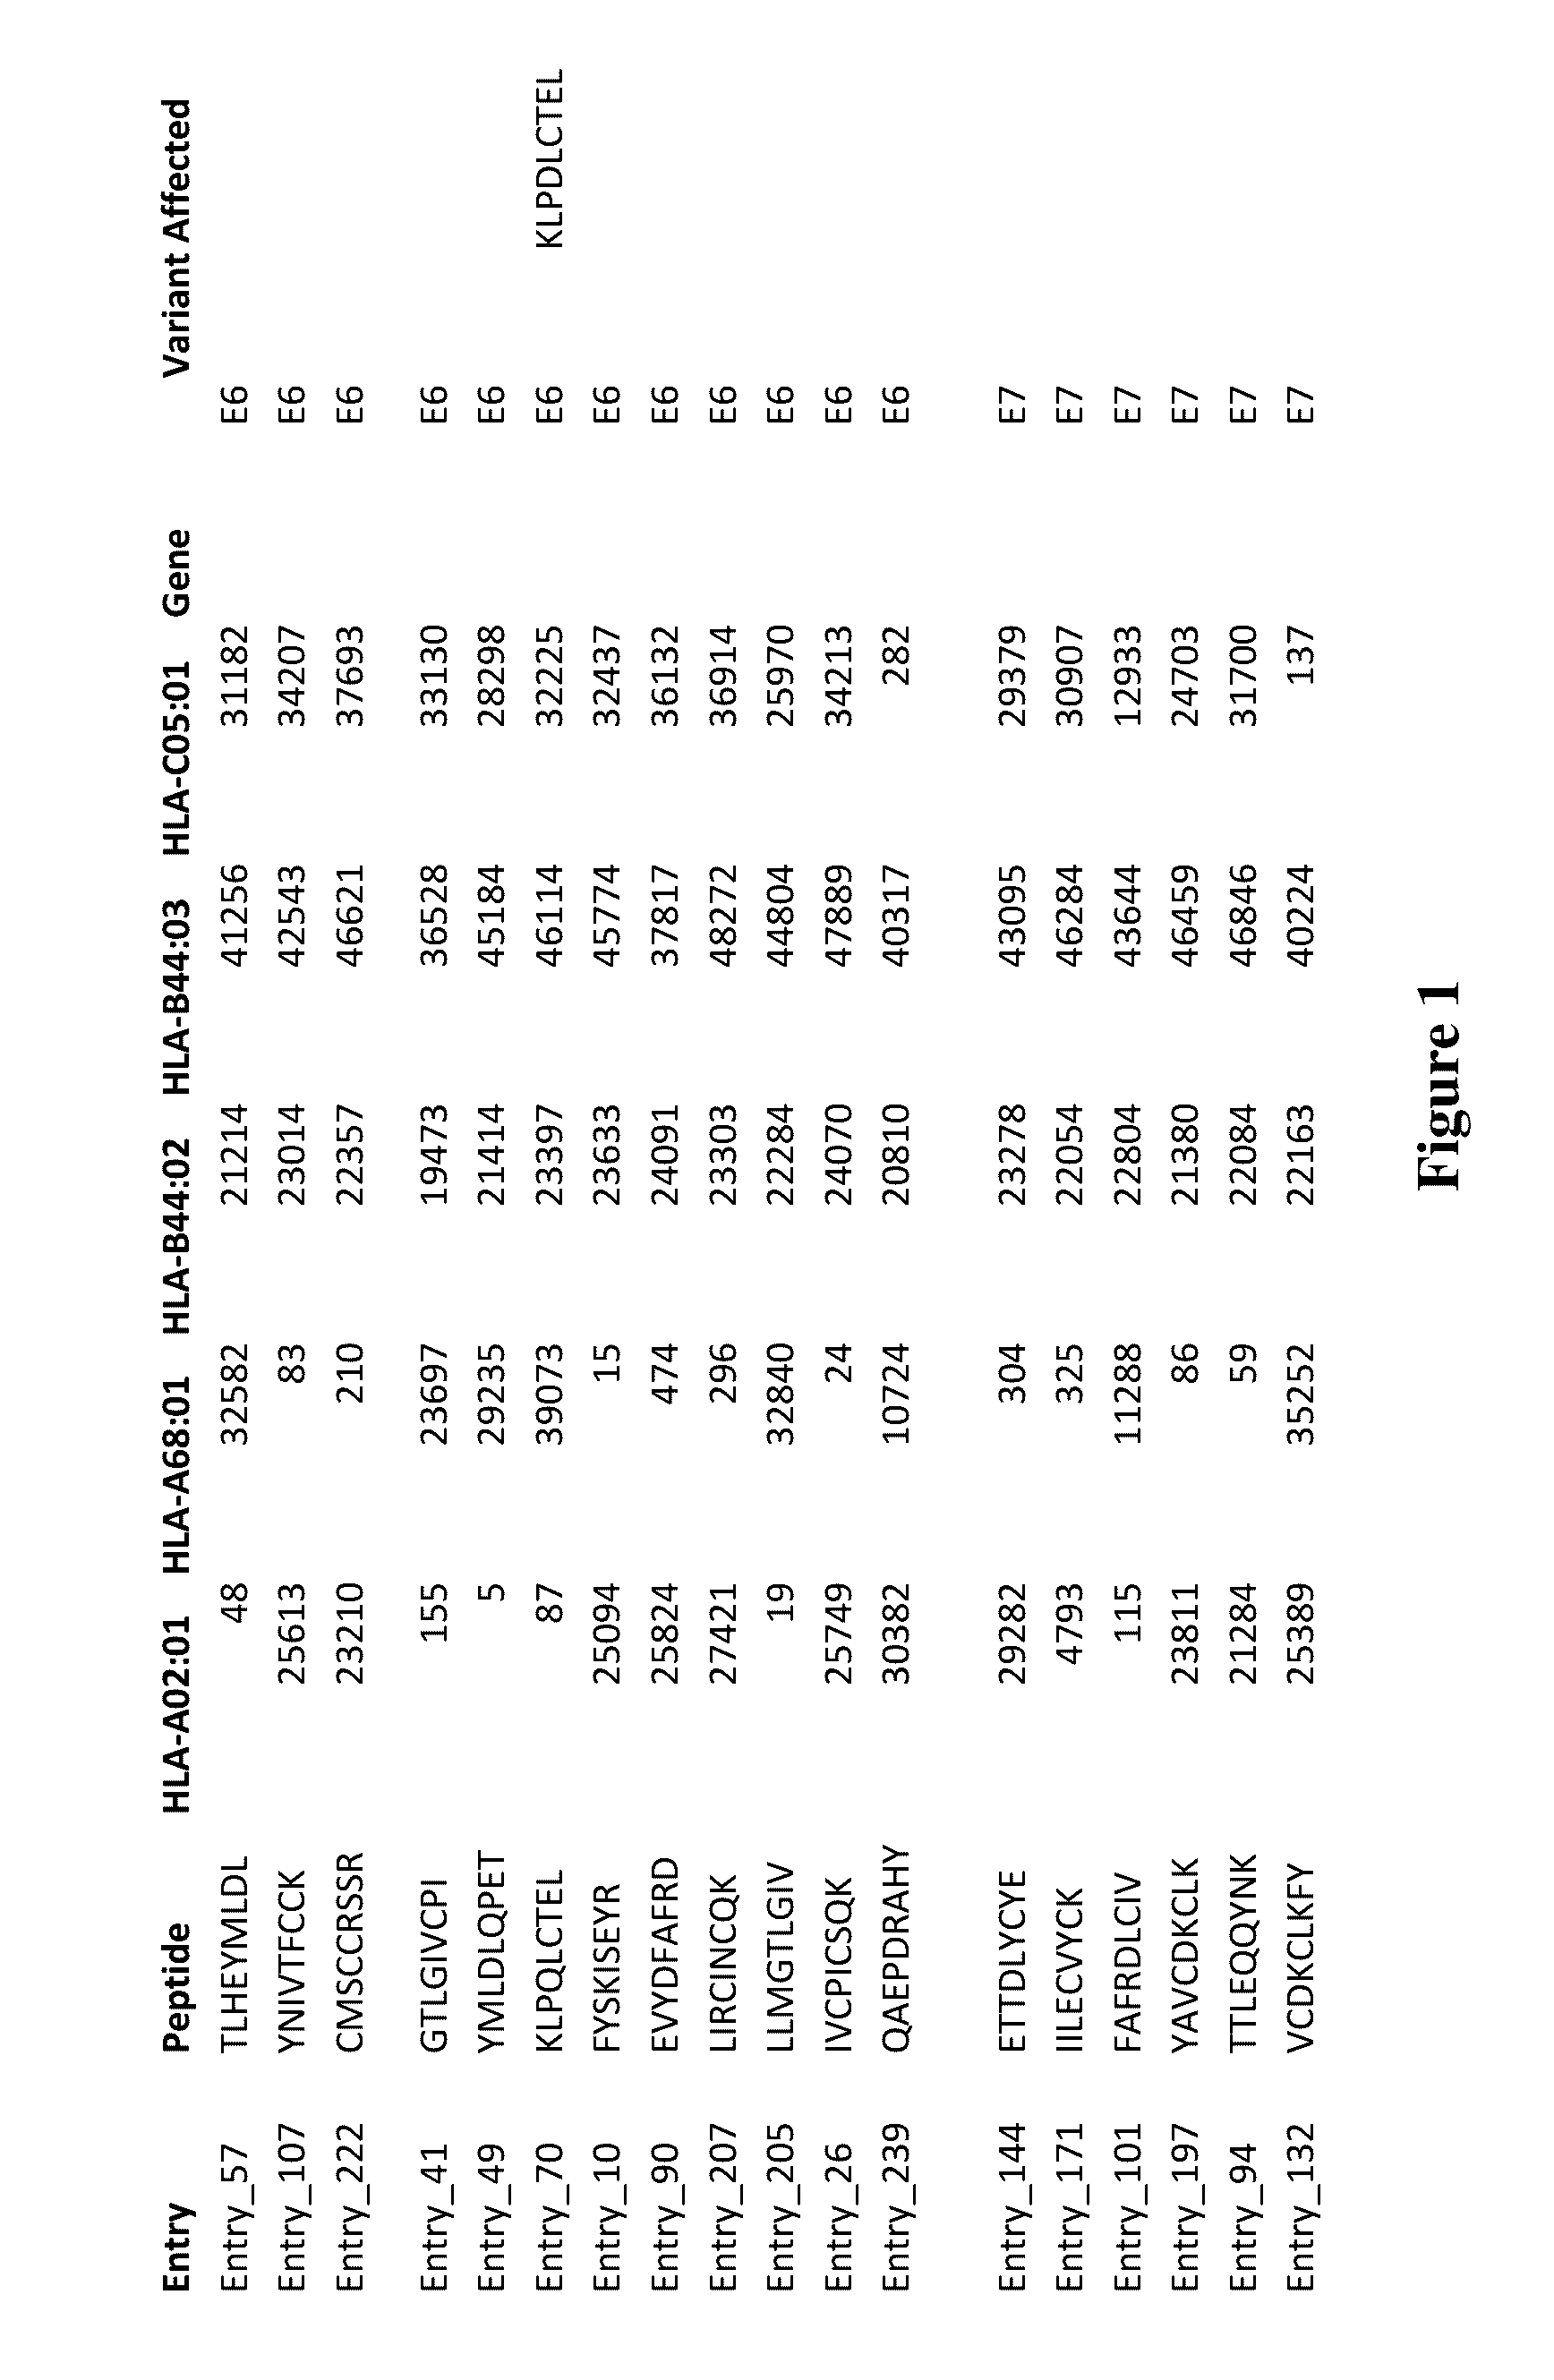 Viral Neoepitopes and Uses Thereof